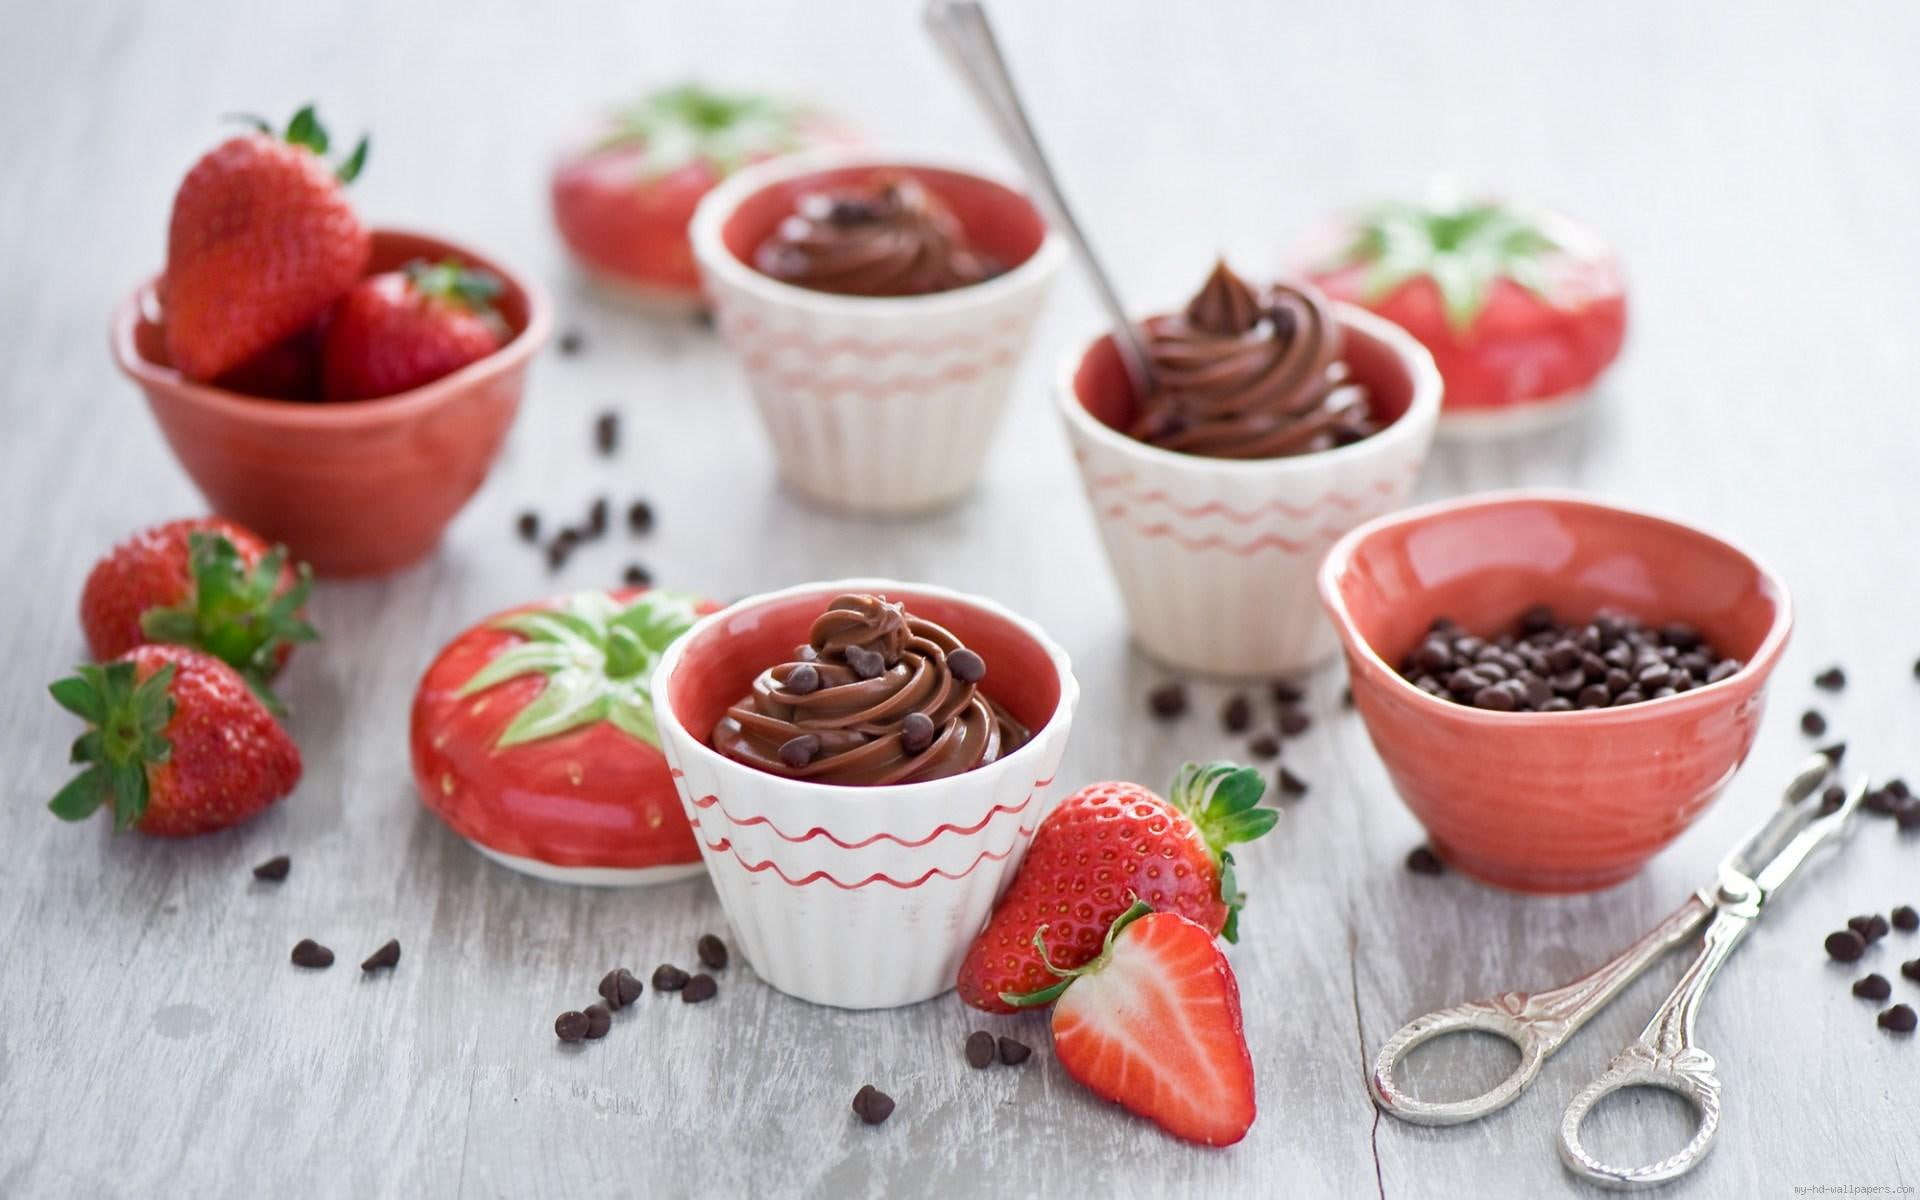 Strawberries and chocolate cupcakes, strawberry and chocolate on cup